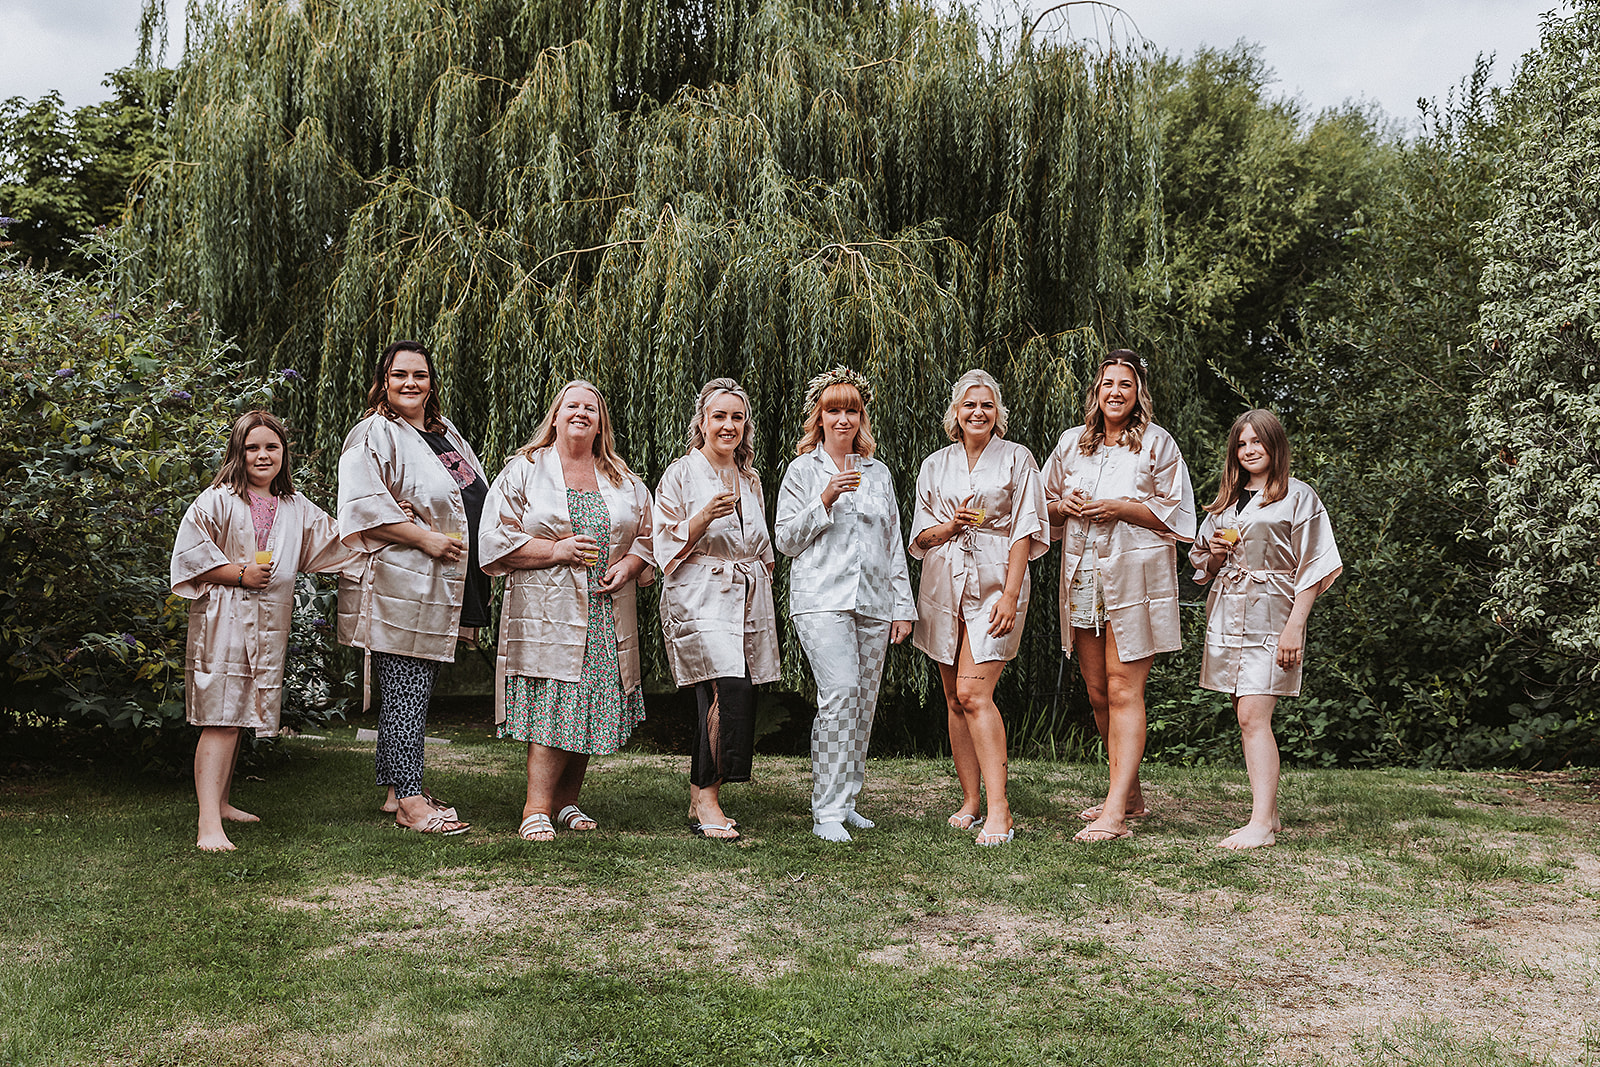 wedding gowns dressing gowns bridesmaids toasting wedding photographer photography Hertfordshire  